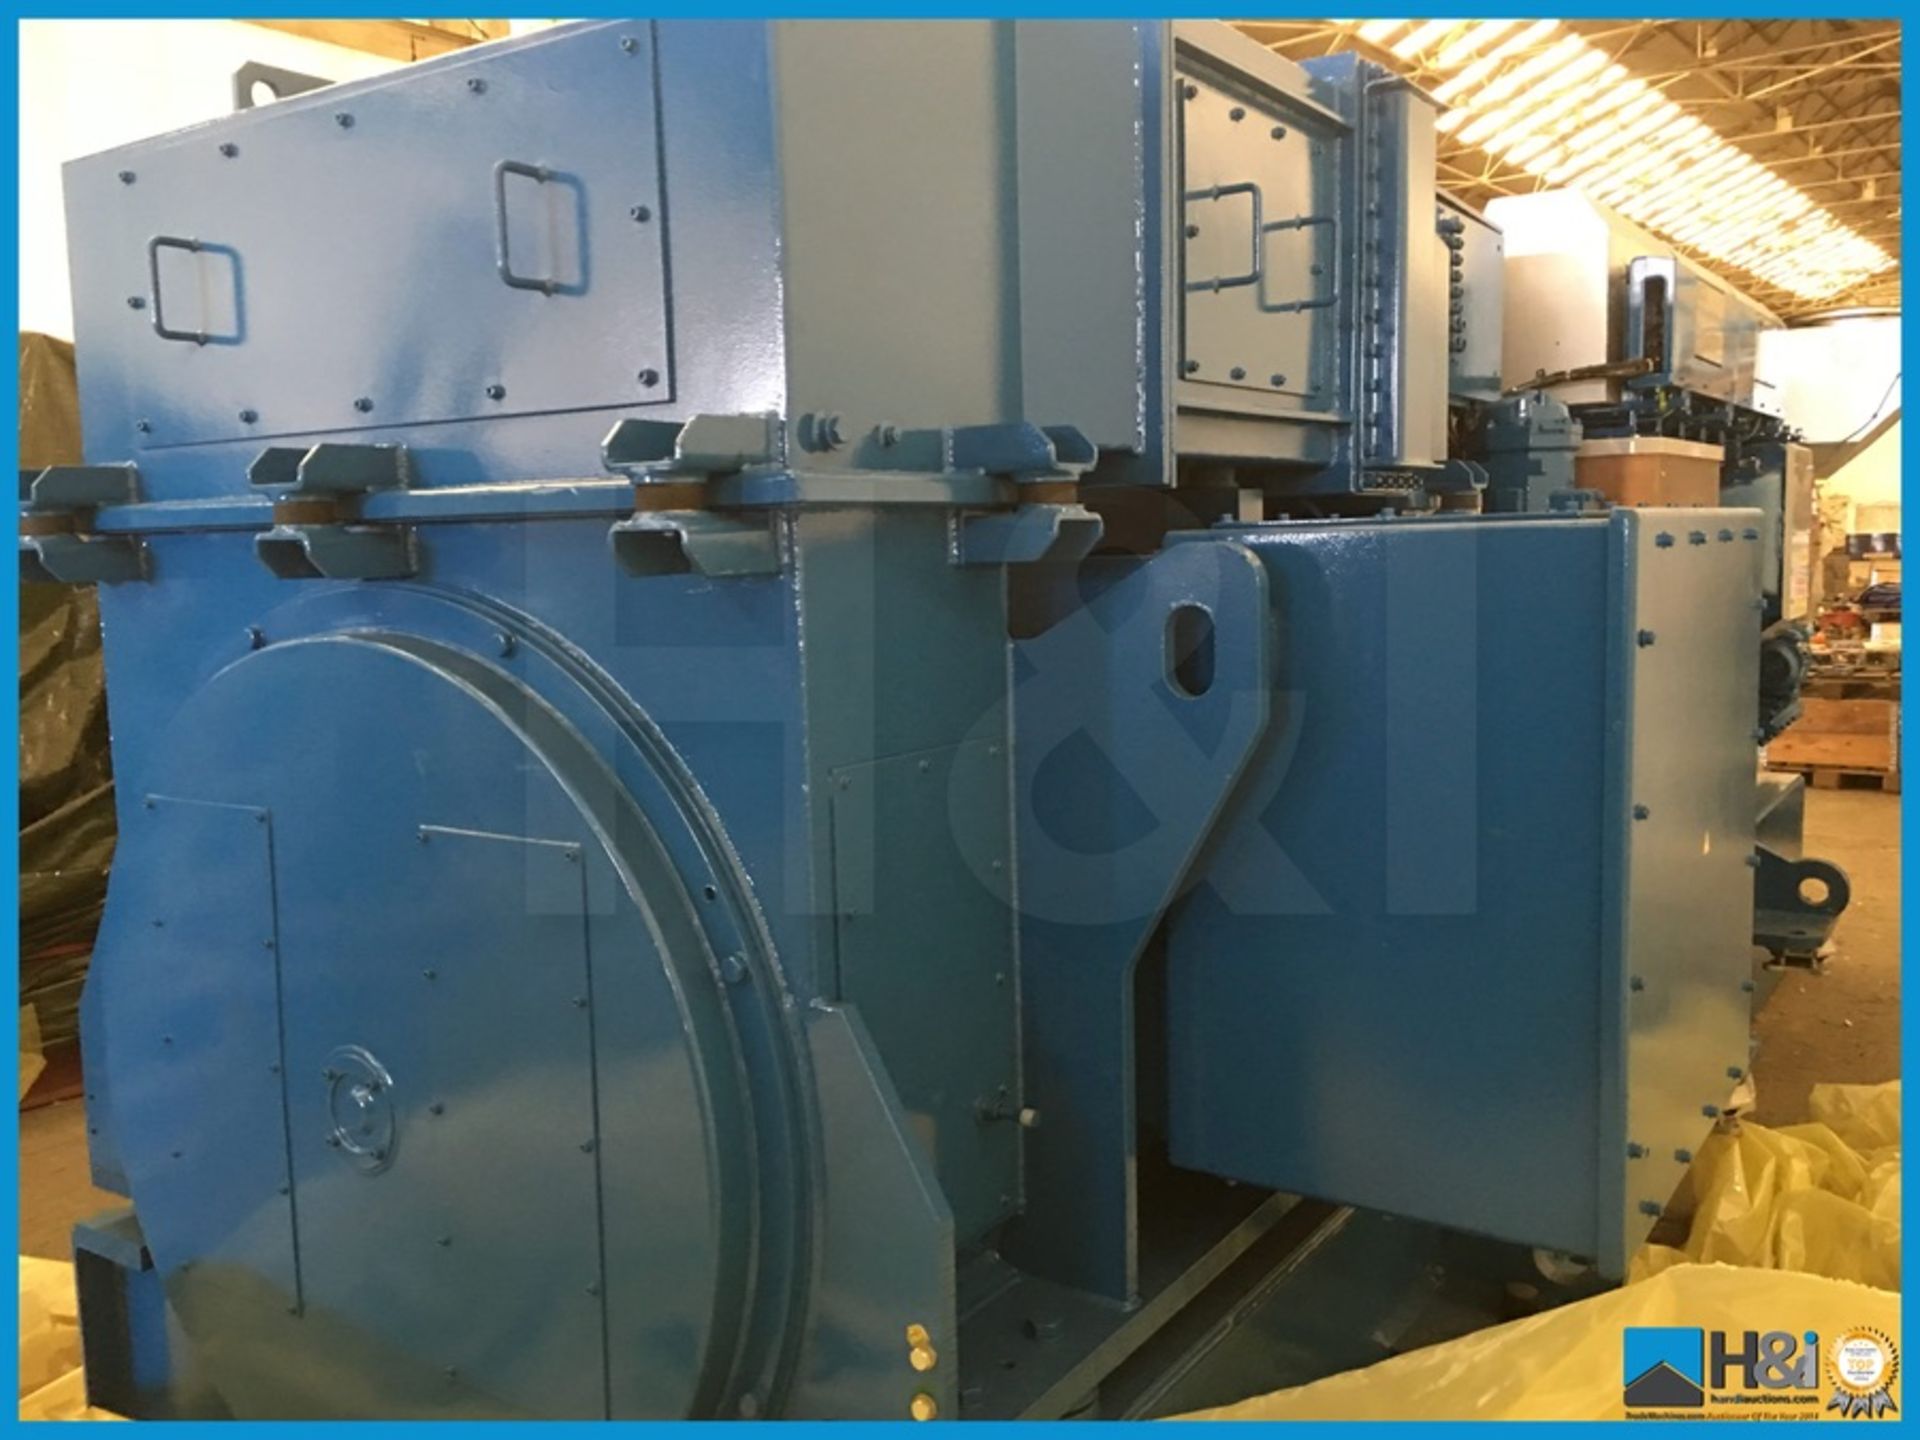 Unused Wartsila 9L20 high capacity diesel generator manufactured in 2013 for a large marine - Image 8 of 17